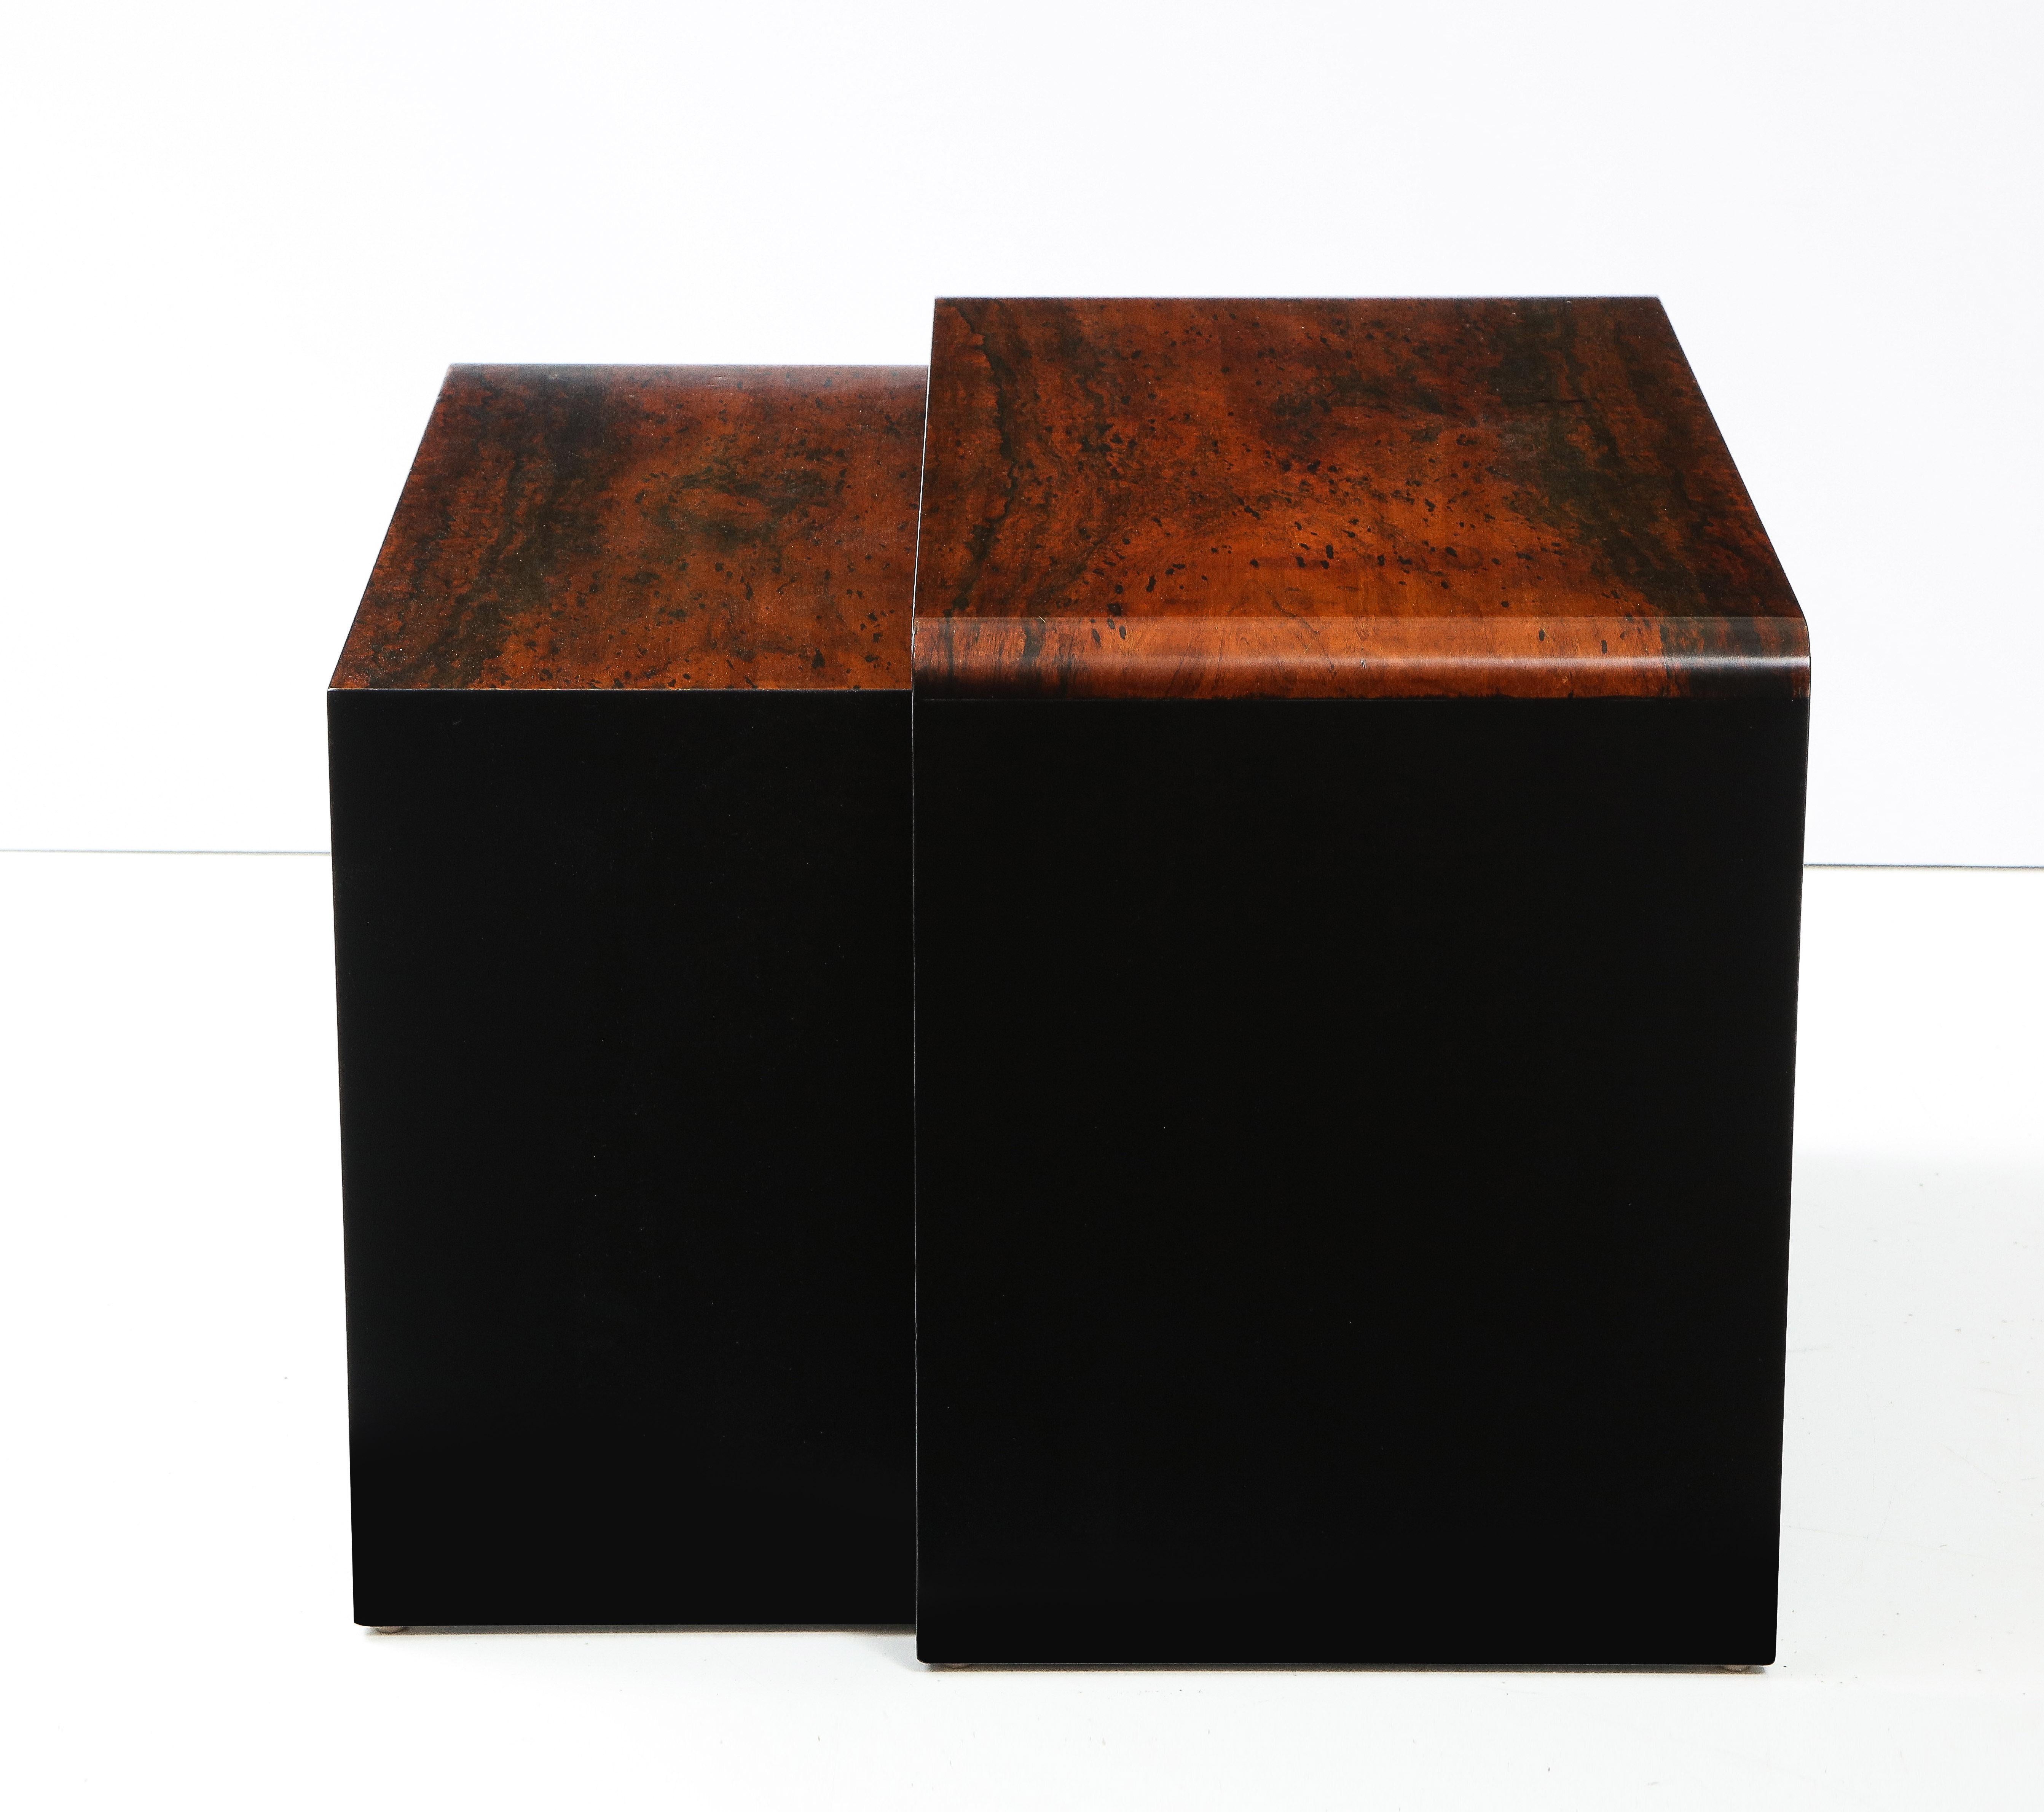 Set of Italian Rosewood and Ebony Lacquered Nesting Tables, circa 1970 For Sale 3